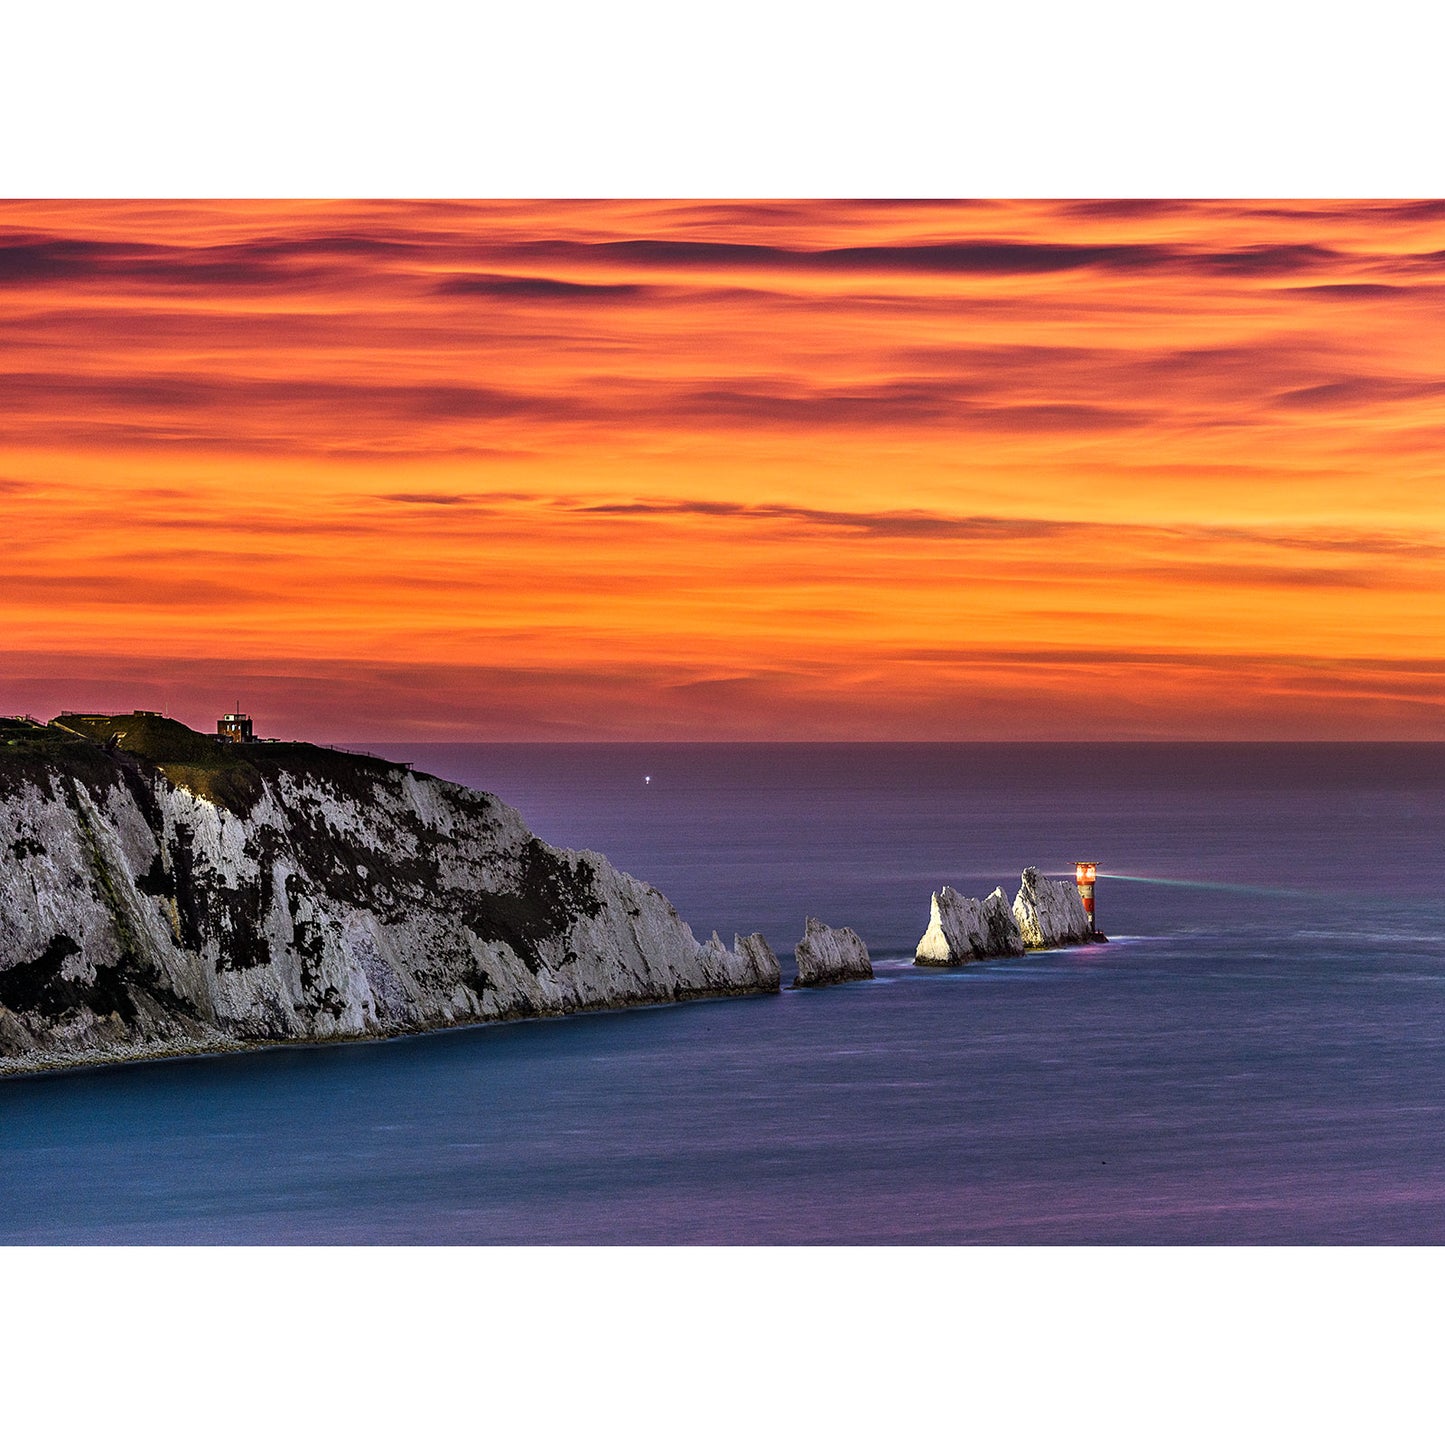 A vibrant sunset over the Isle of Wight's coastal landscape with white cliffs and a lighthouse captured in "The Needles by Moonlight" by Available Light Photography.